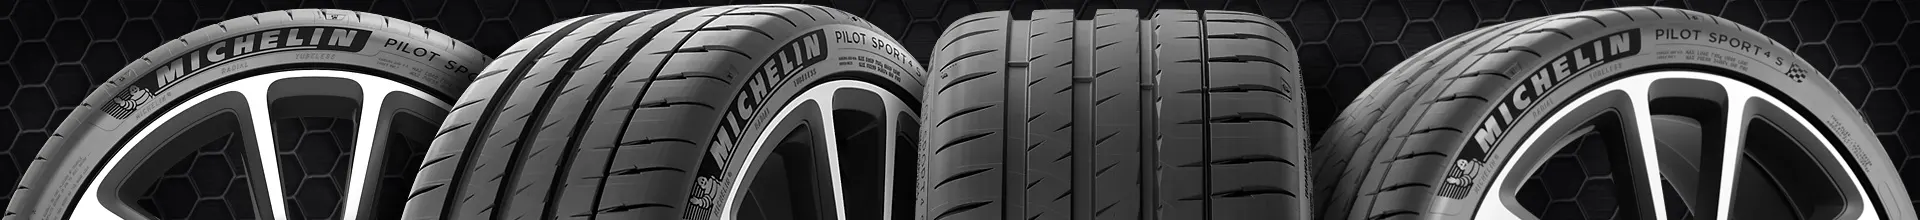 185 55 16 discount tires from Online Wheels Direct